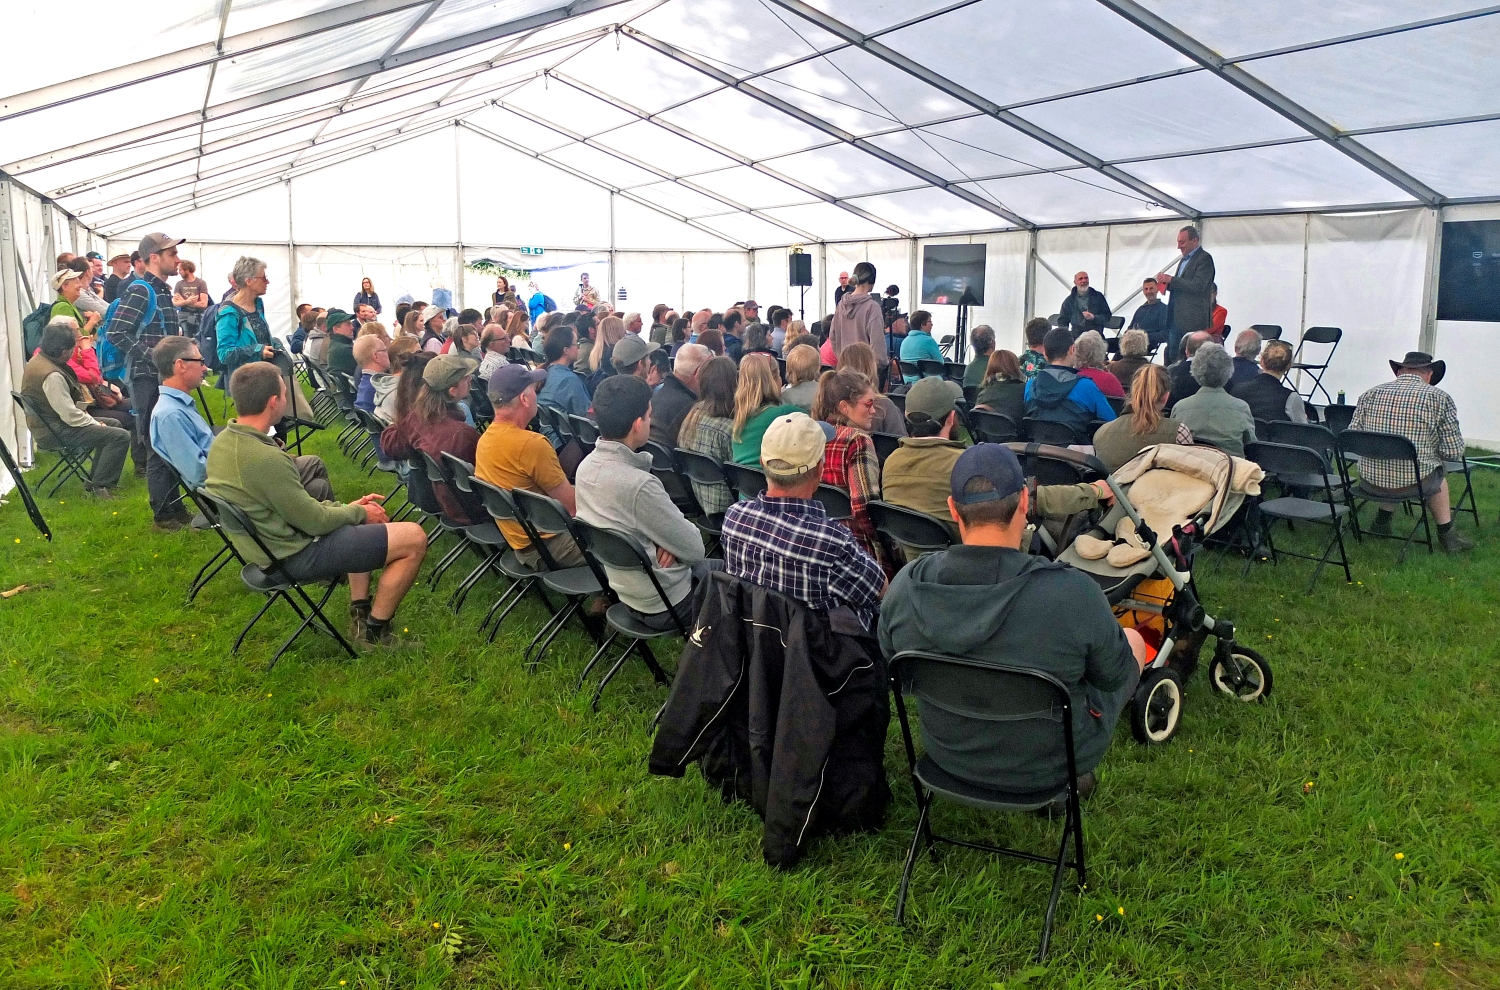 Seated crowd in marque tent listening to speaker. 